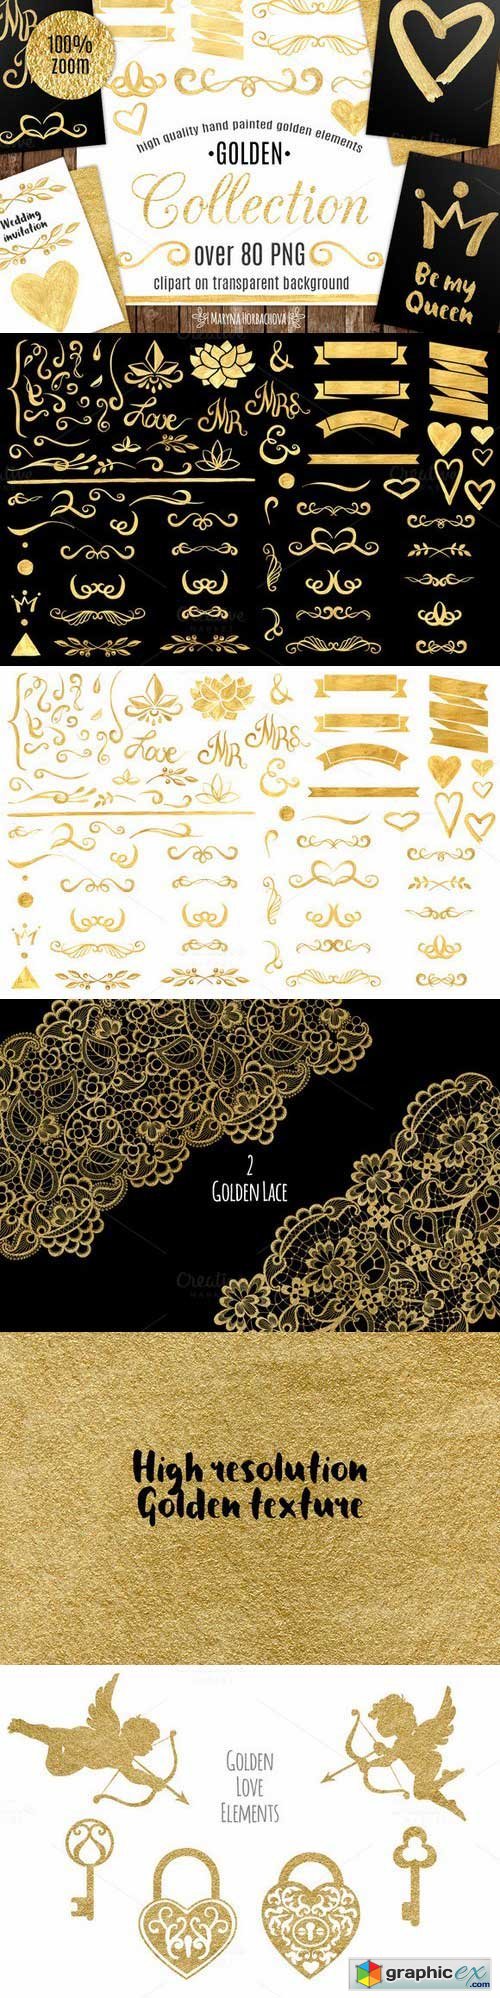 Gold Graphic Collection